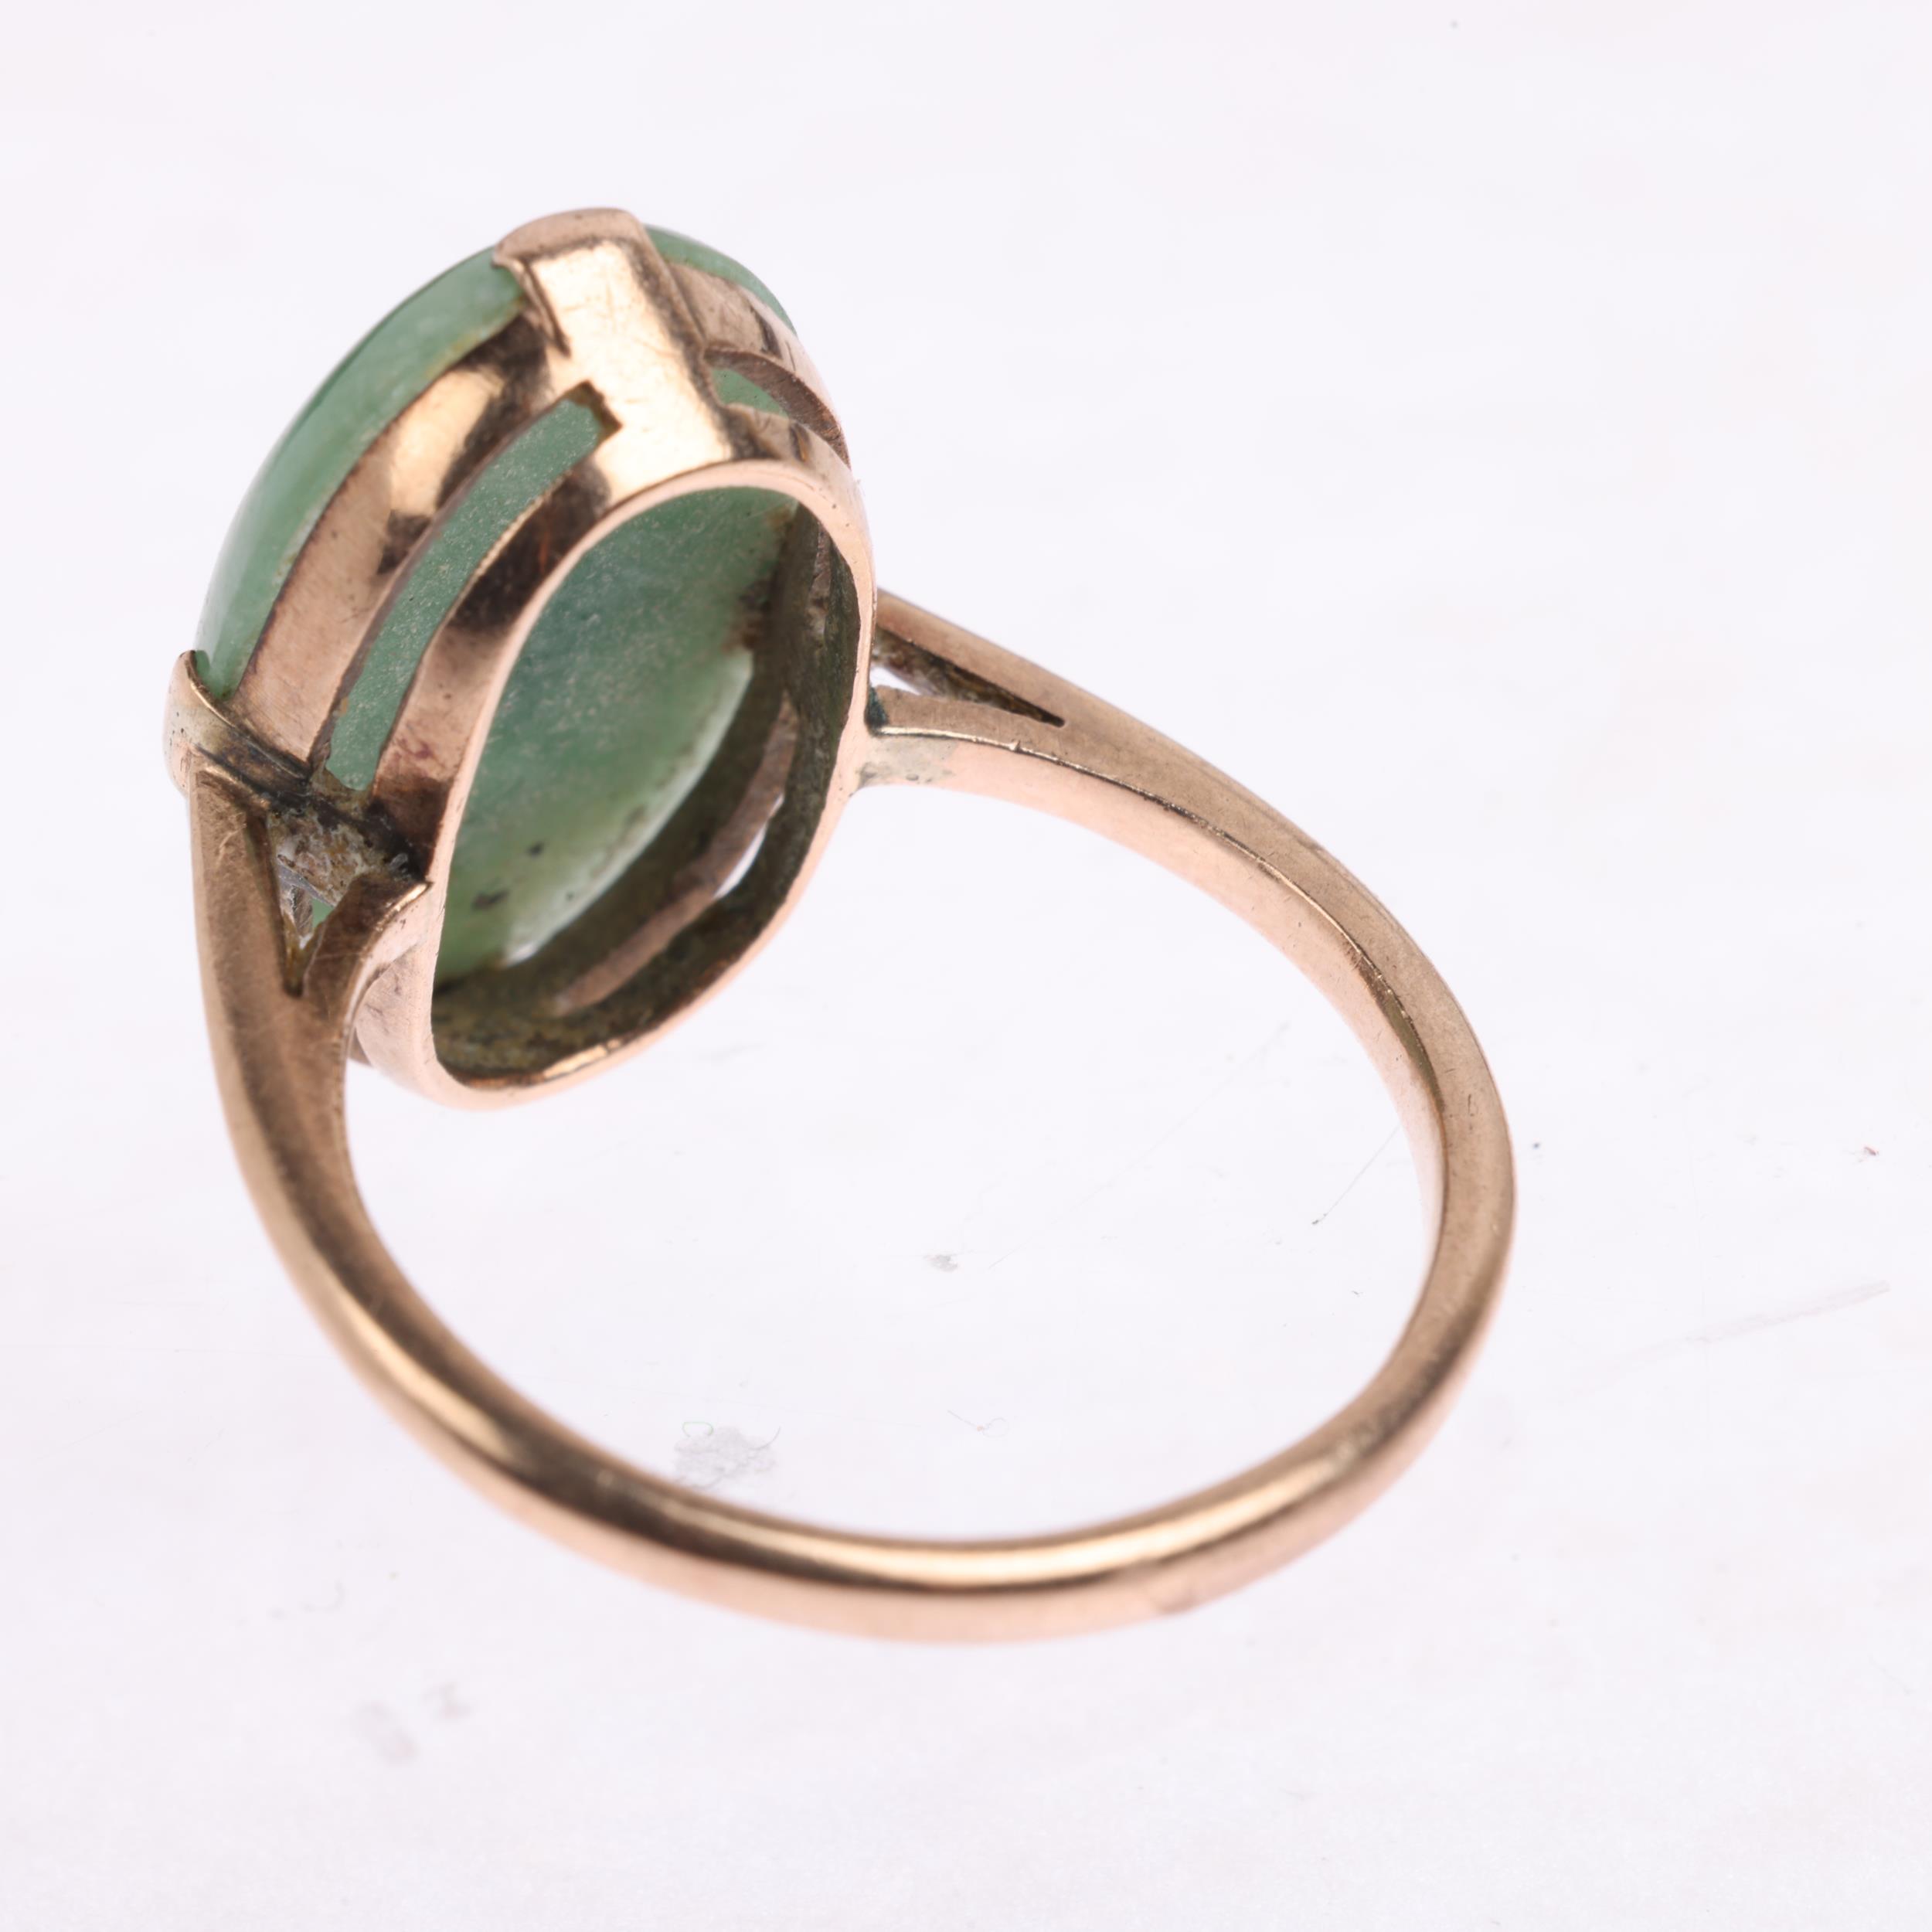 A late 20th century jadeite panel ring, claw set with oval cabochon jadeite, apparently unmarked, - Image 3 of 4